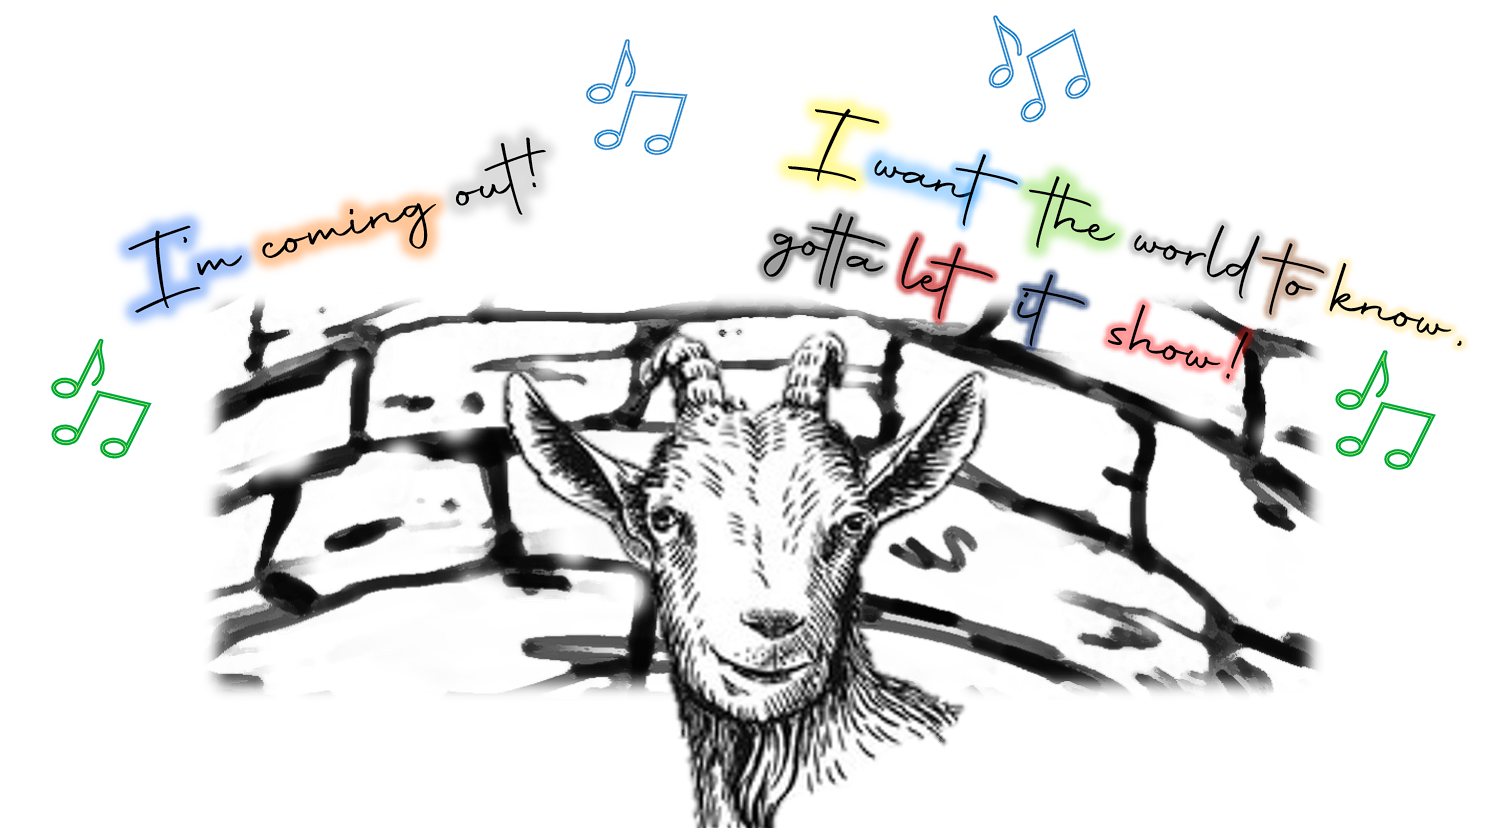 A goat inside the well singing, “I’m coming out! I want the world to know, gotta let it show…”